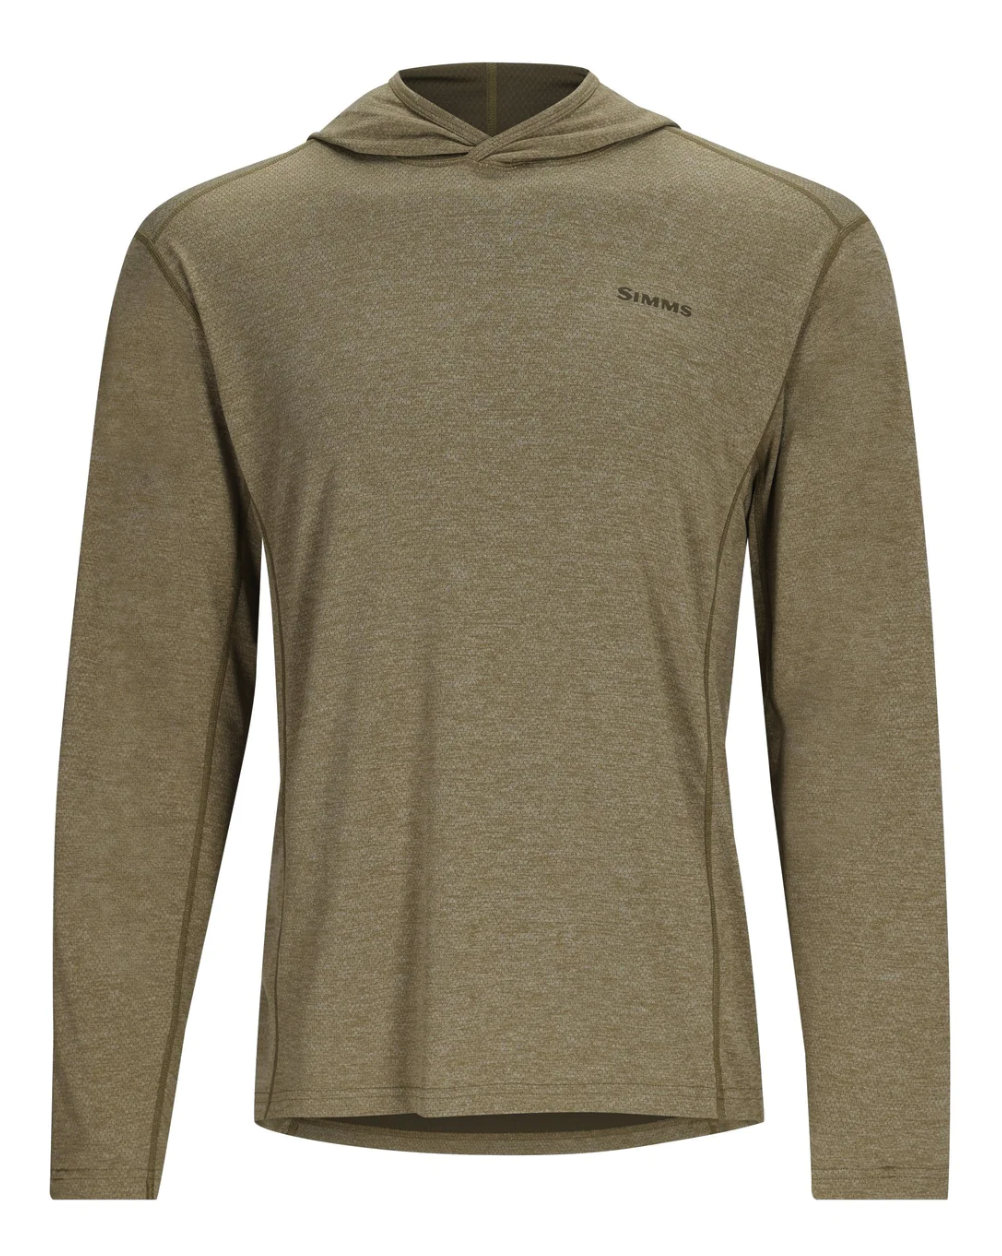 Order Simms BugStopper Hoody online for the best bug protection fishing shirts for sale.